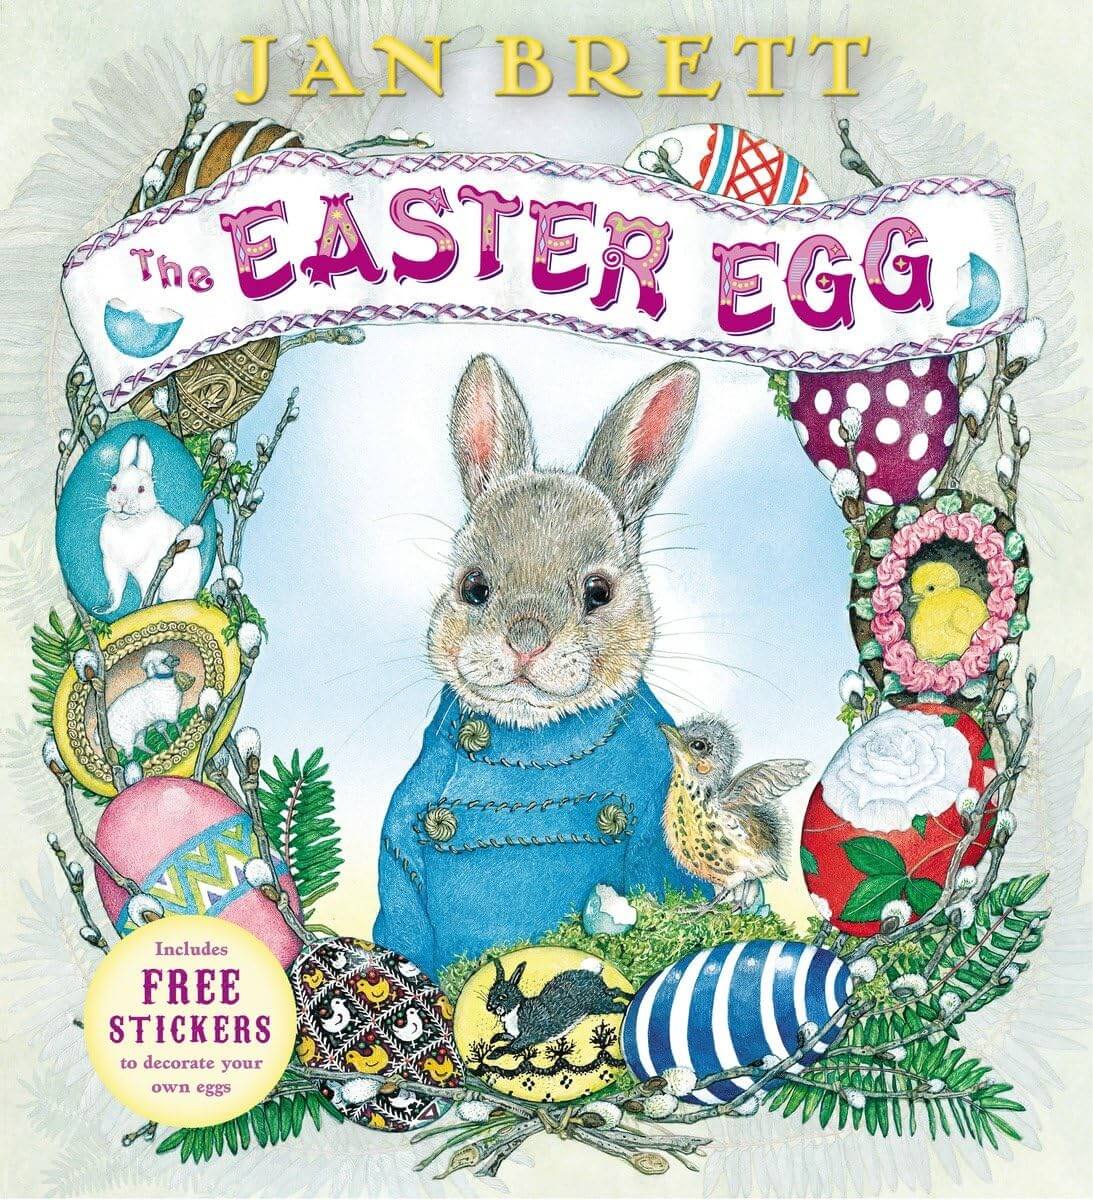 Easter egg book with egg border and rabbit in center